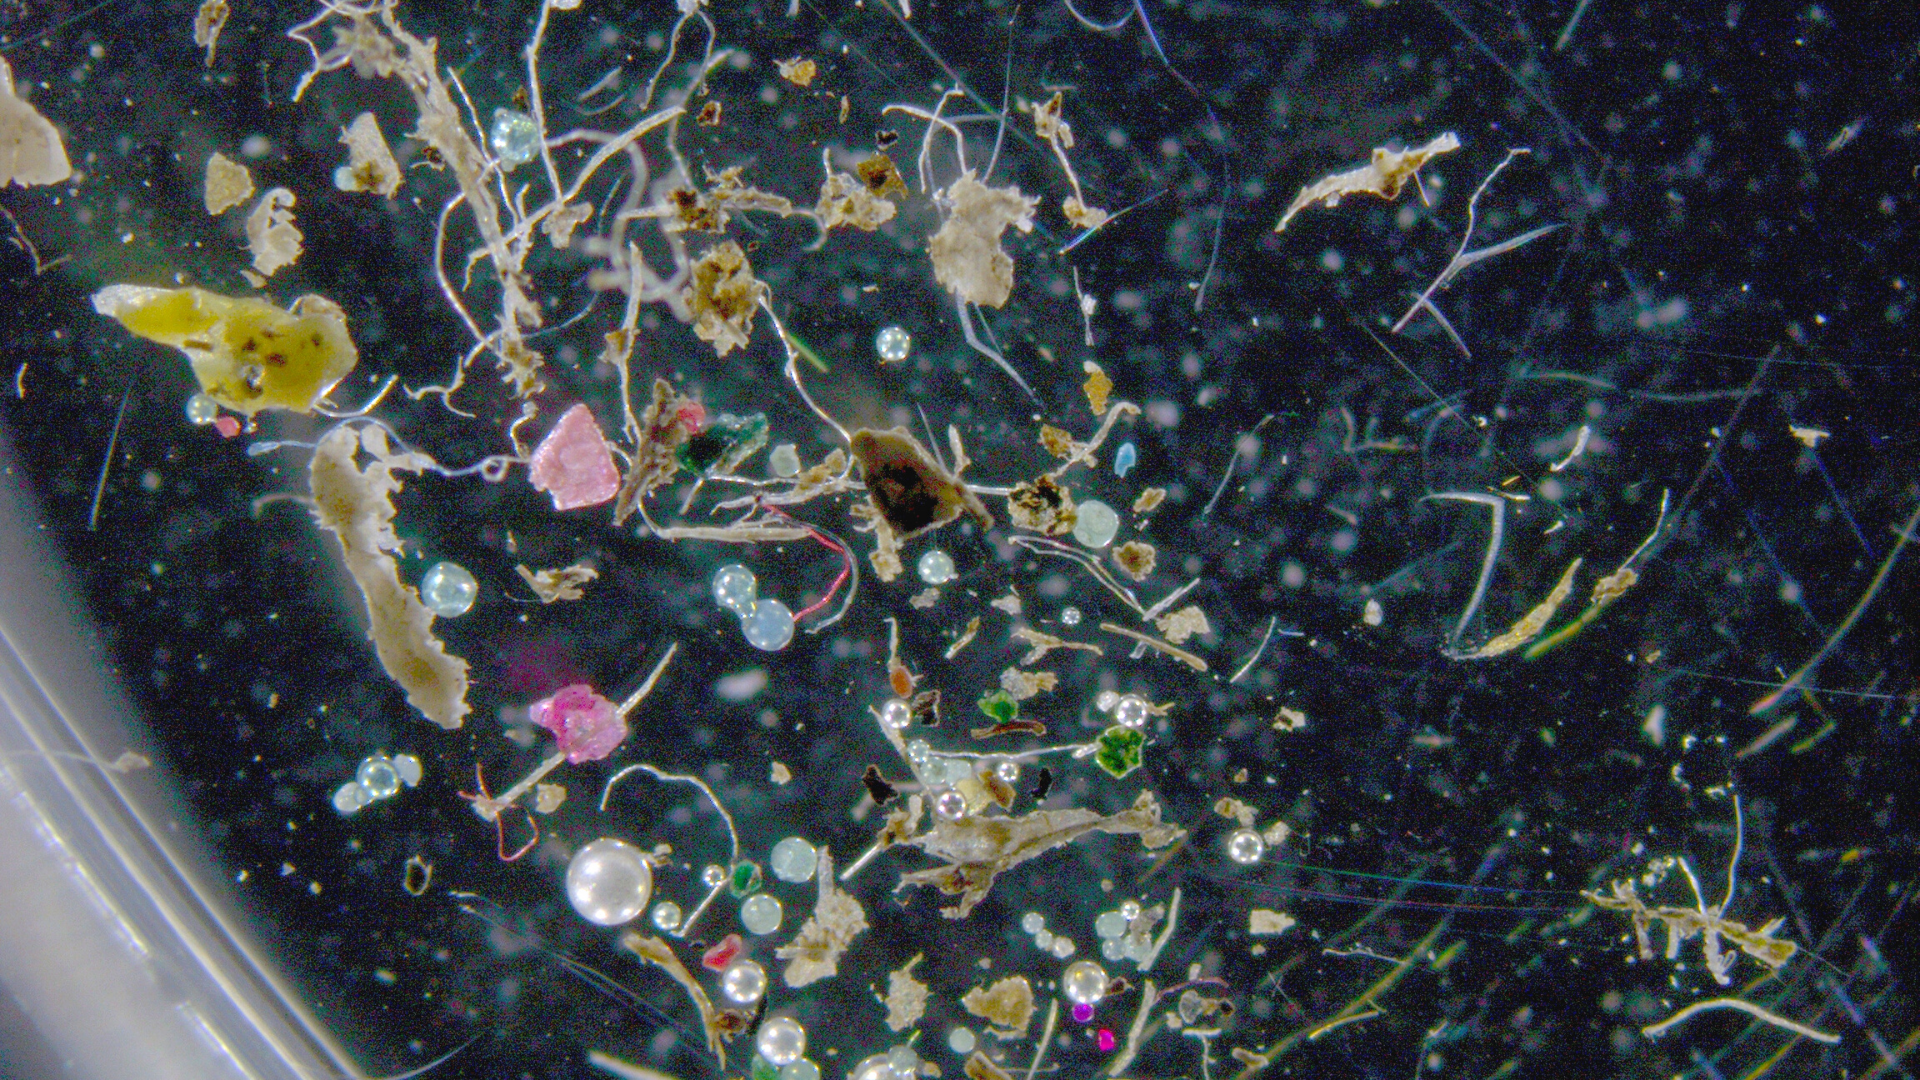 An assemblage of microplastic particles from a contaminated river bed. The large microbead at lower left is about 200 microns in diameter. Image credit: Jiawei Li